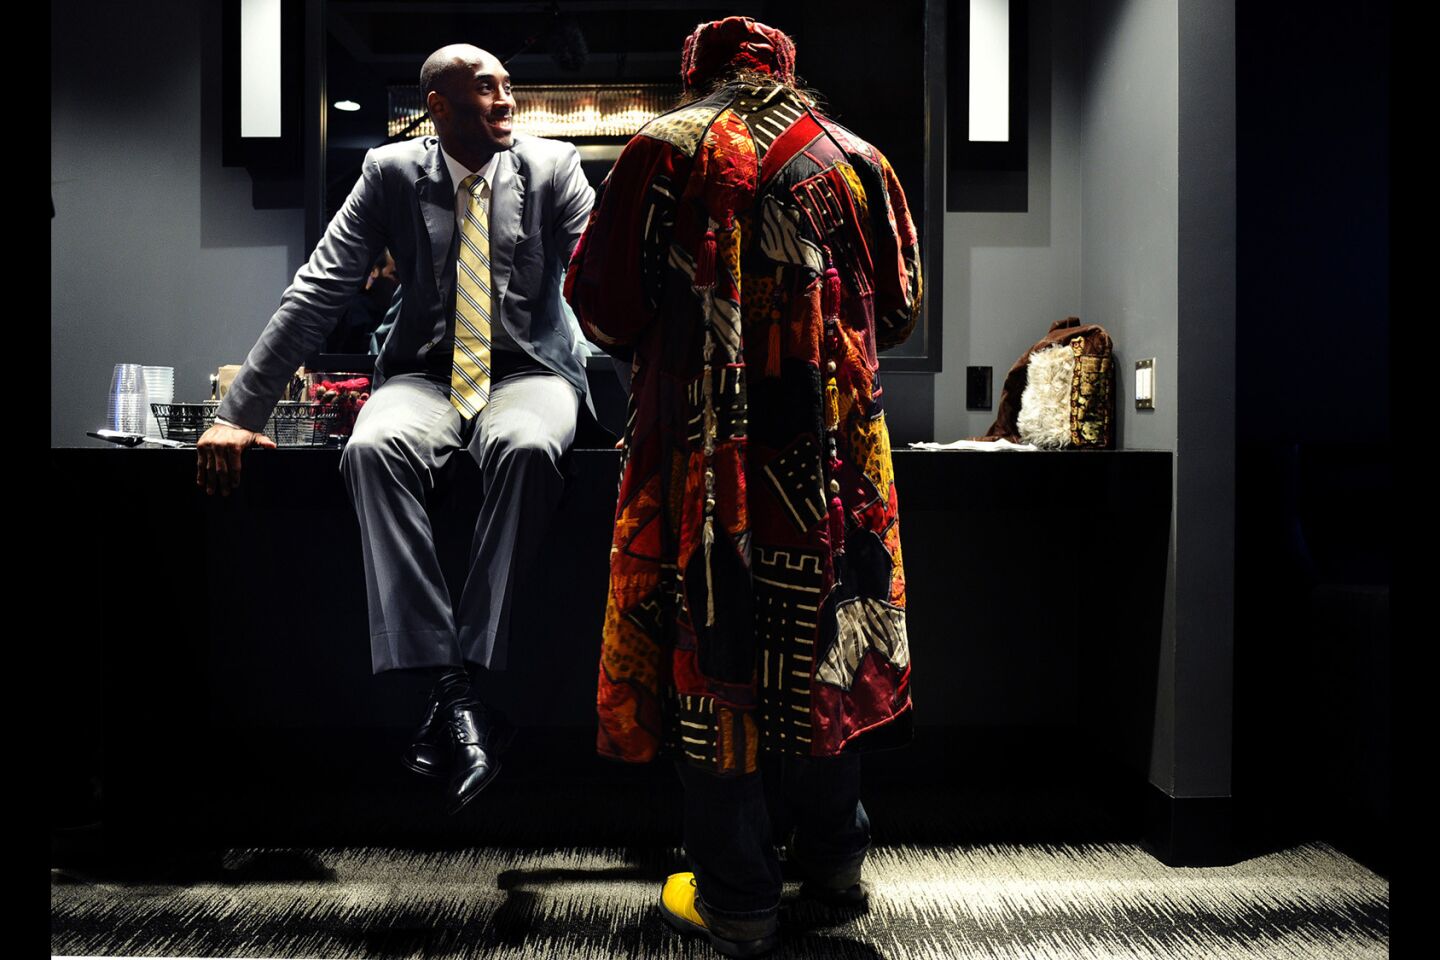 Lakers Kobe Bryant waits to be interviewed by radio personality Vic "The Brick" Jacobs in a private room at the Staples Center.